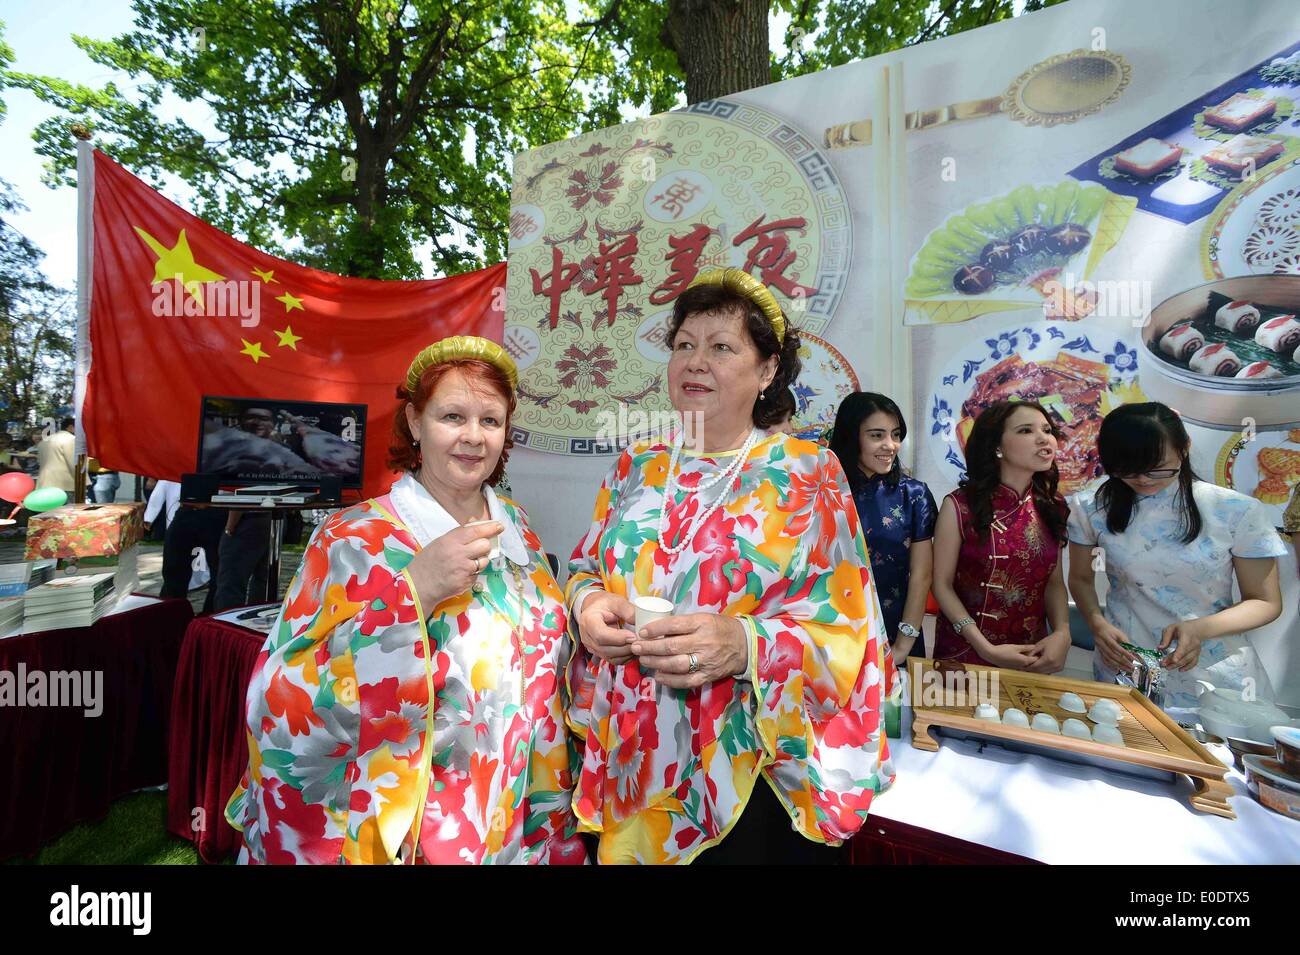 Tashkent, Uzbekistan. 10th May, 2014. Visitors enjoy Chinese tea during the 12nd Uzbekistan foreign mission traditional culture and folk cuisine feast in Tashkent, Uzbekistan, May 10, 2014. The 12nd Uzbekistan foreign mission traditional culture and folk cuisine feast opened on Saturday. Credit:  Sadat/Xinhua/Alamy Live News Stock Photo